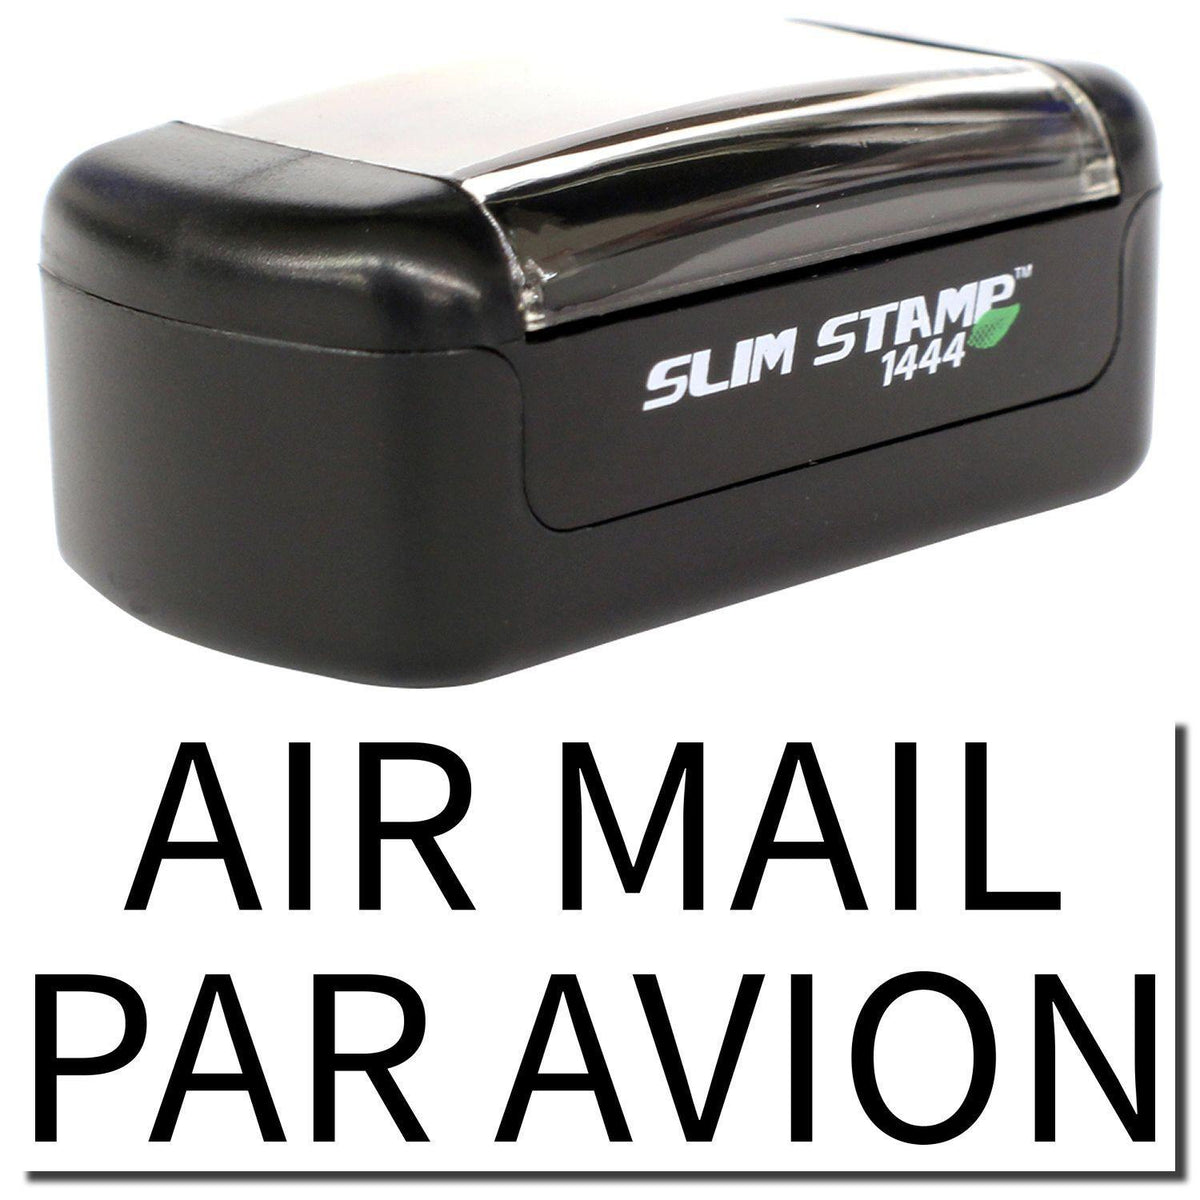 A stock office pre-inked stamp with a stamped image showing how the text &quot;AIR MAIL PAR AVION&quot; is displayed after stamping.